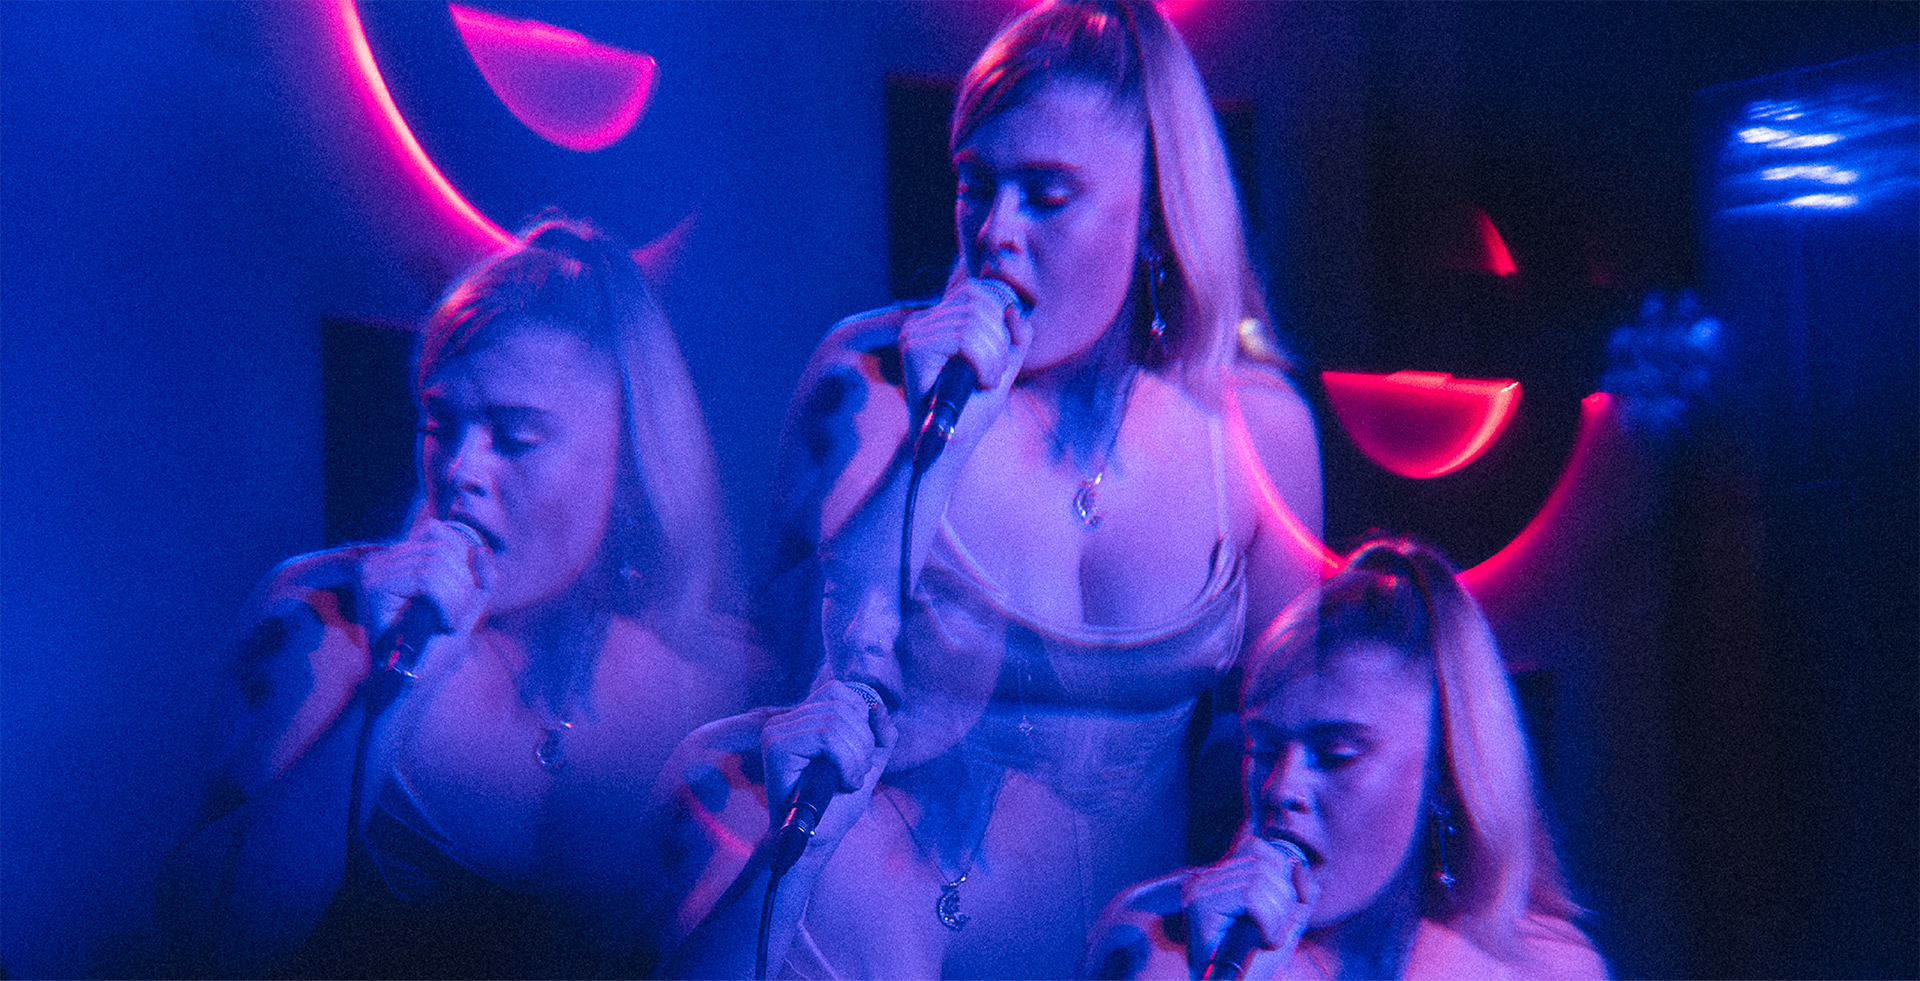 A blue tinged, edited image of a female performing